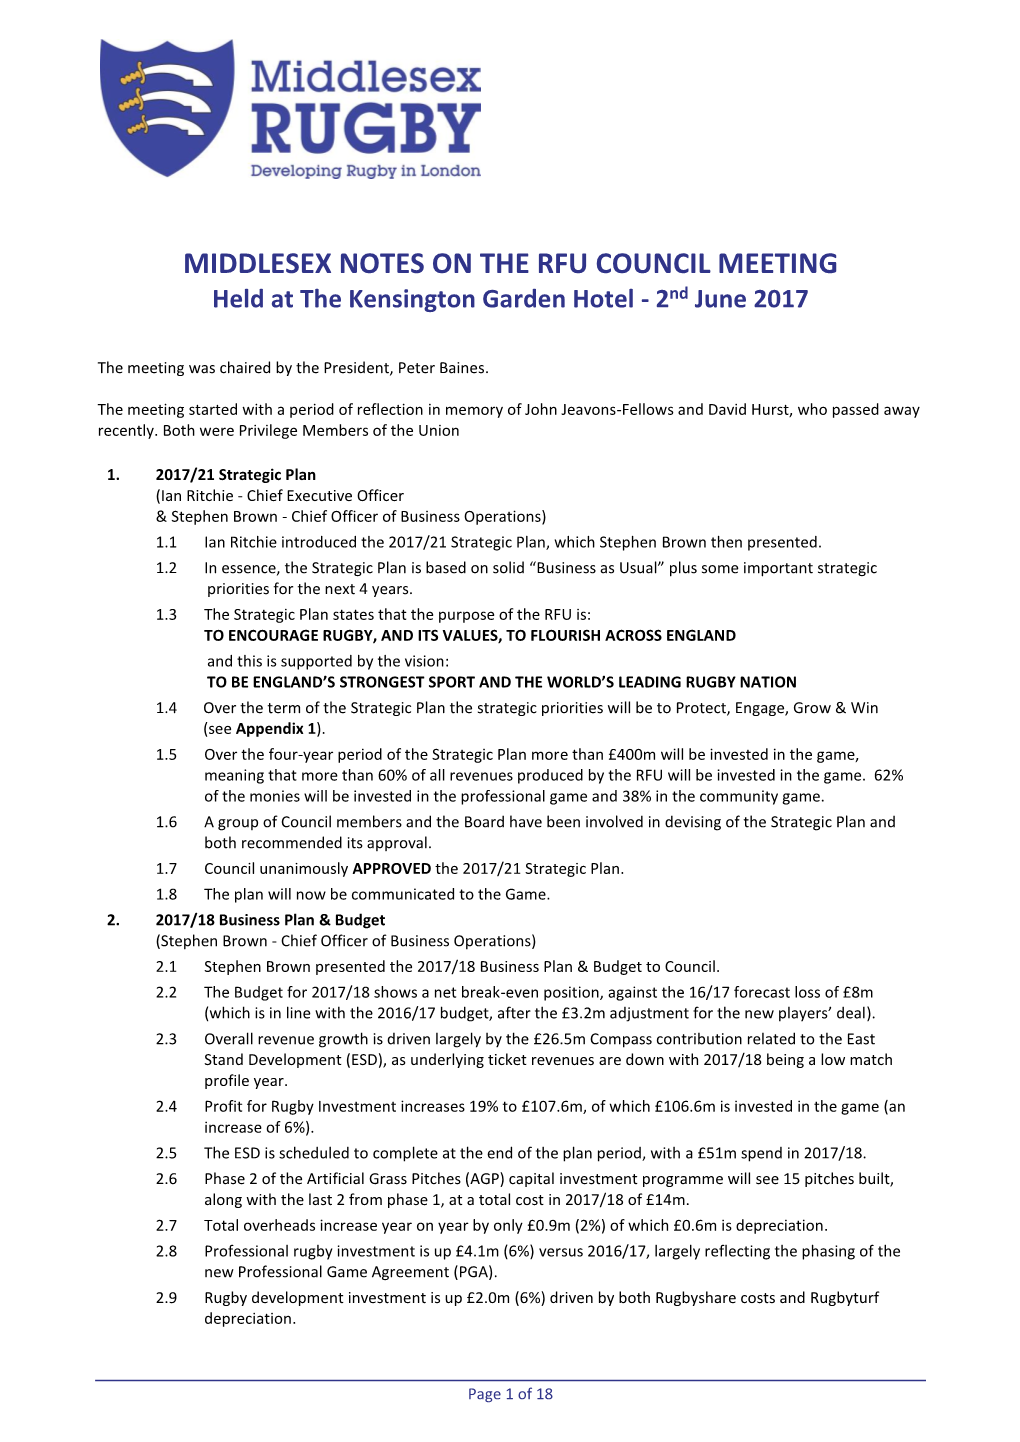 NOTES on the RFU COUNCIL MEETING Held at the Kensington Garden Hotel - 2Nd June 2017